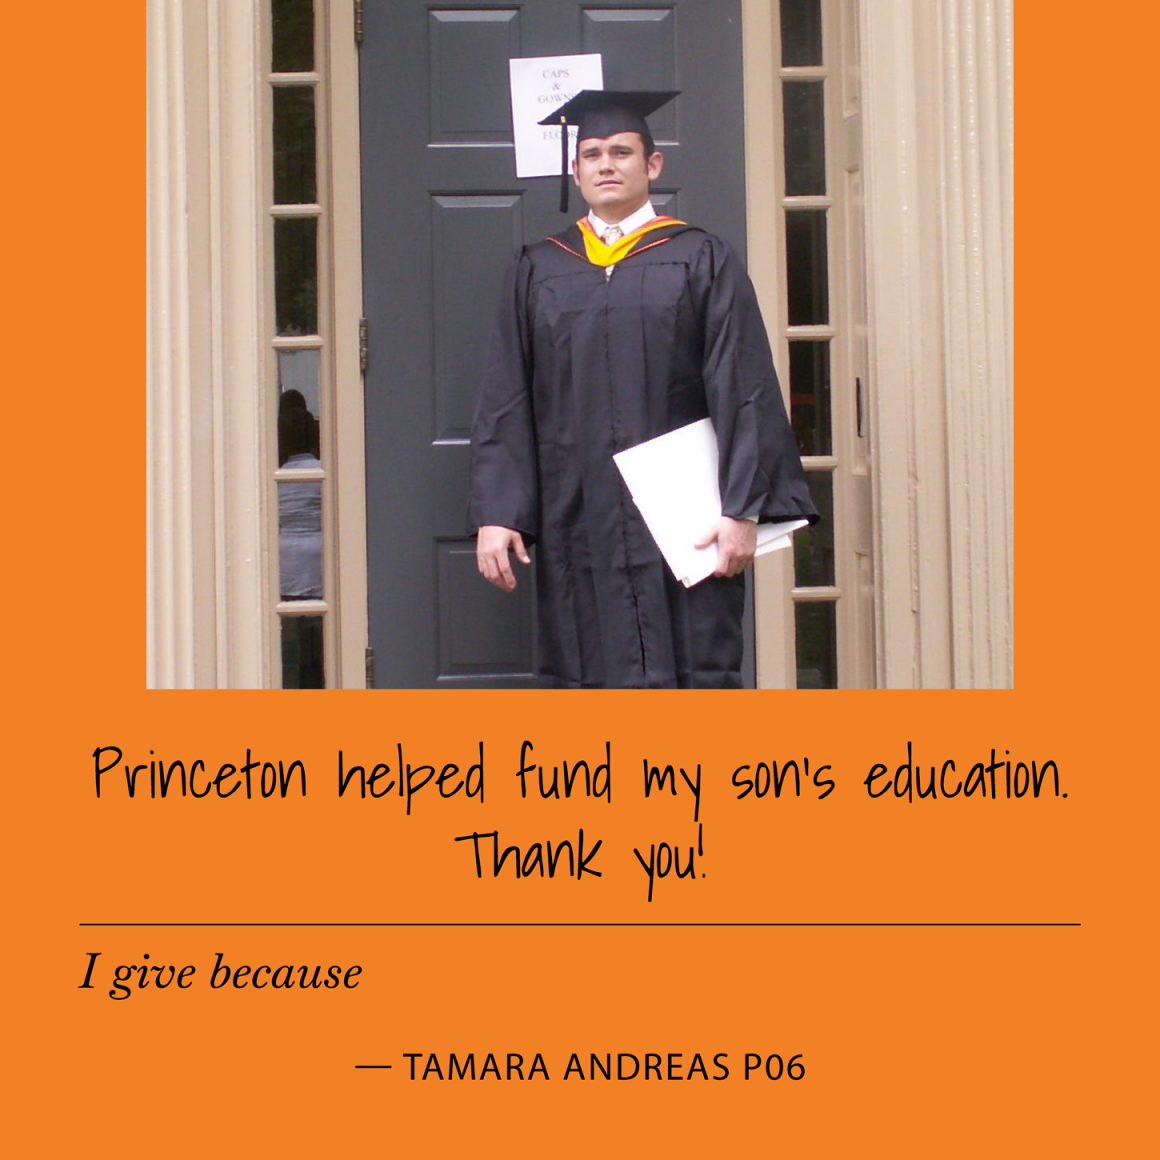 "I give because Princeton helped fund my son's education. Thank you!" Tamara Andreas P06